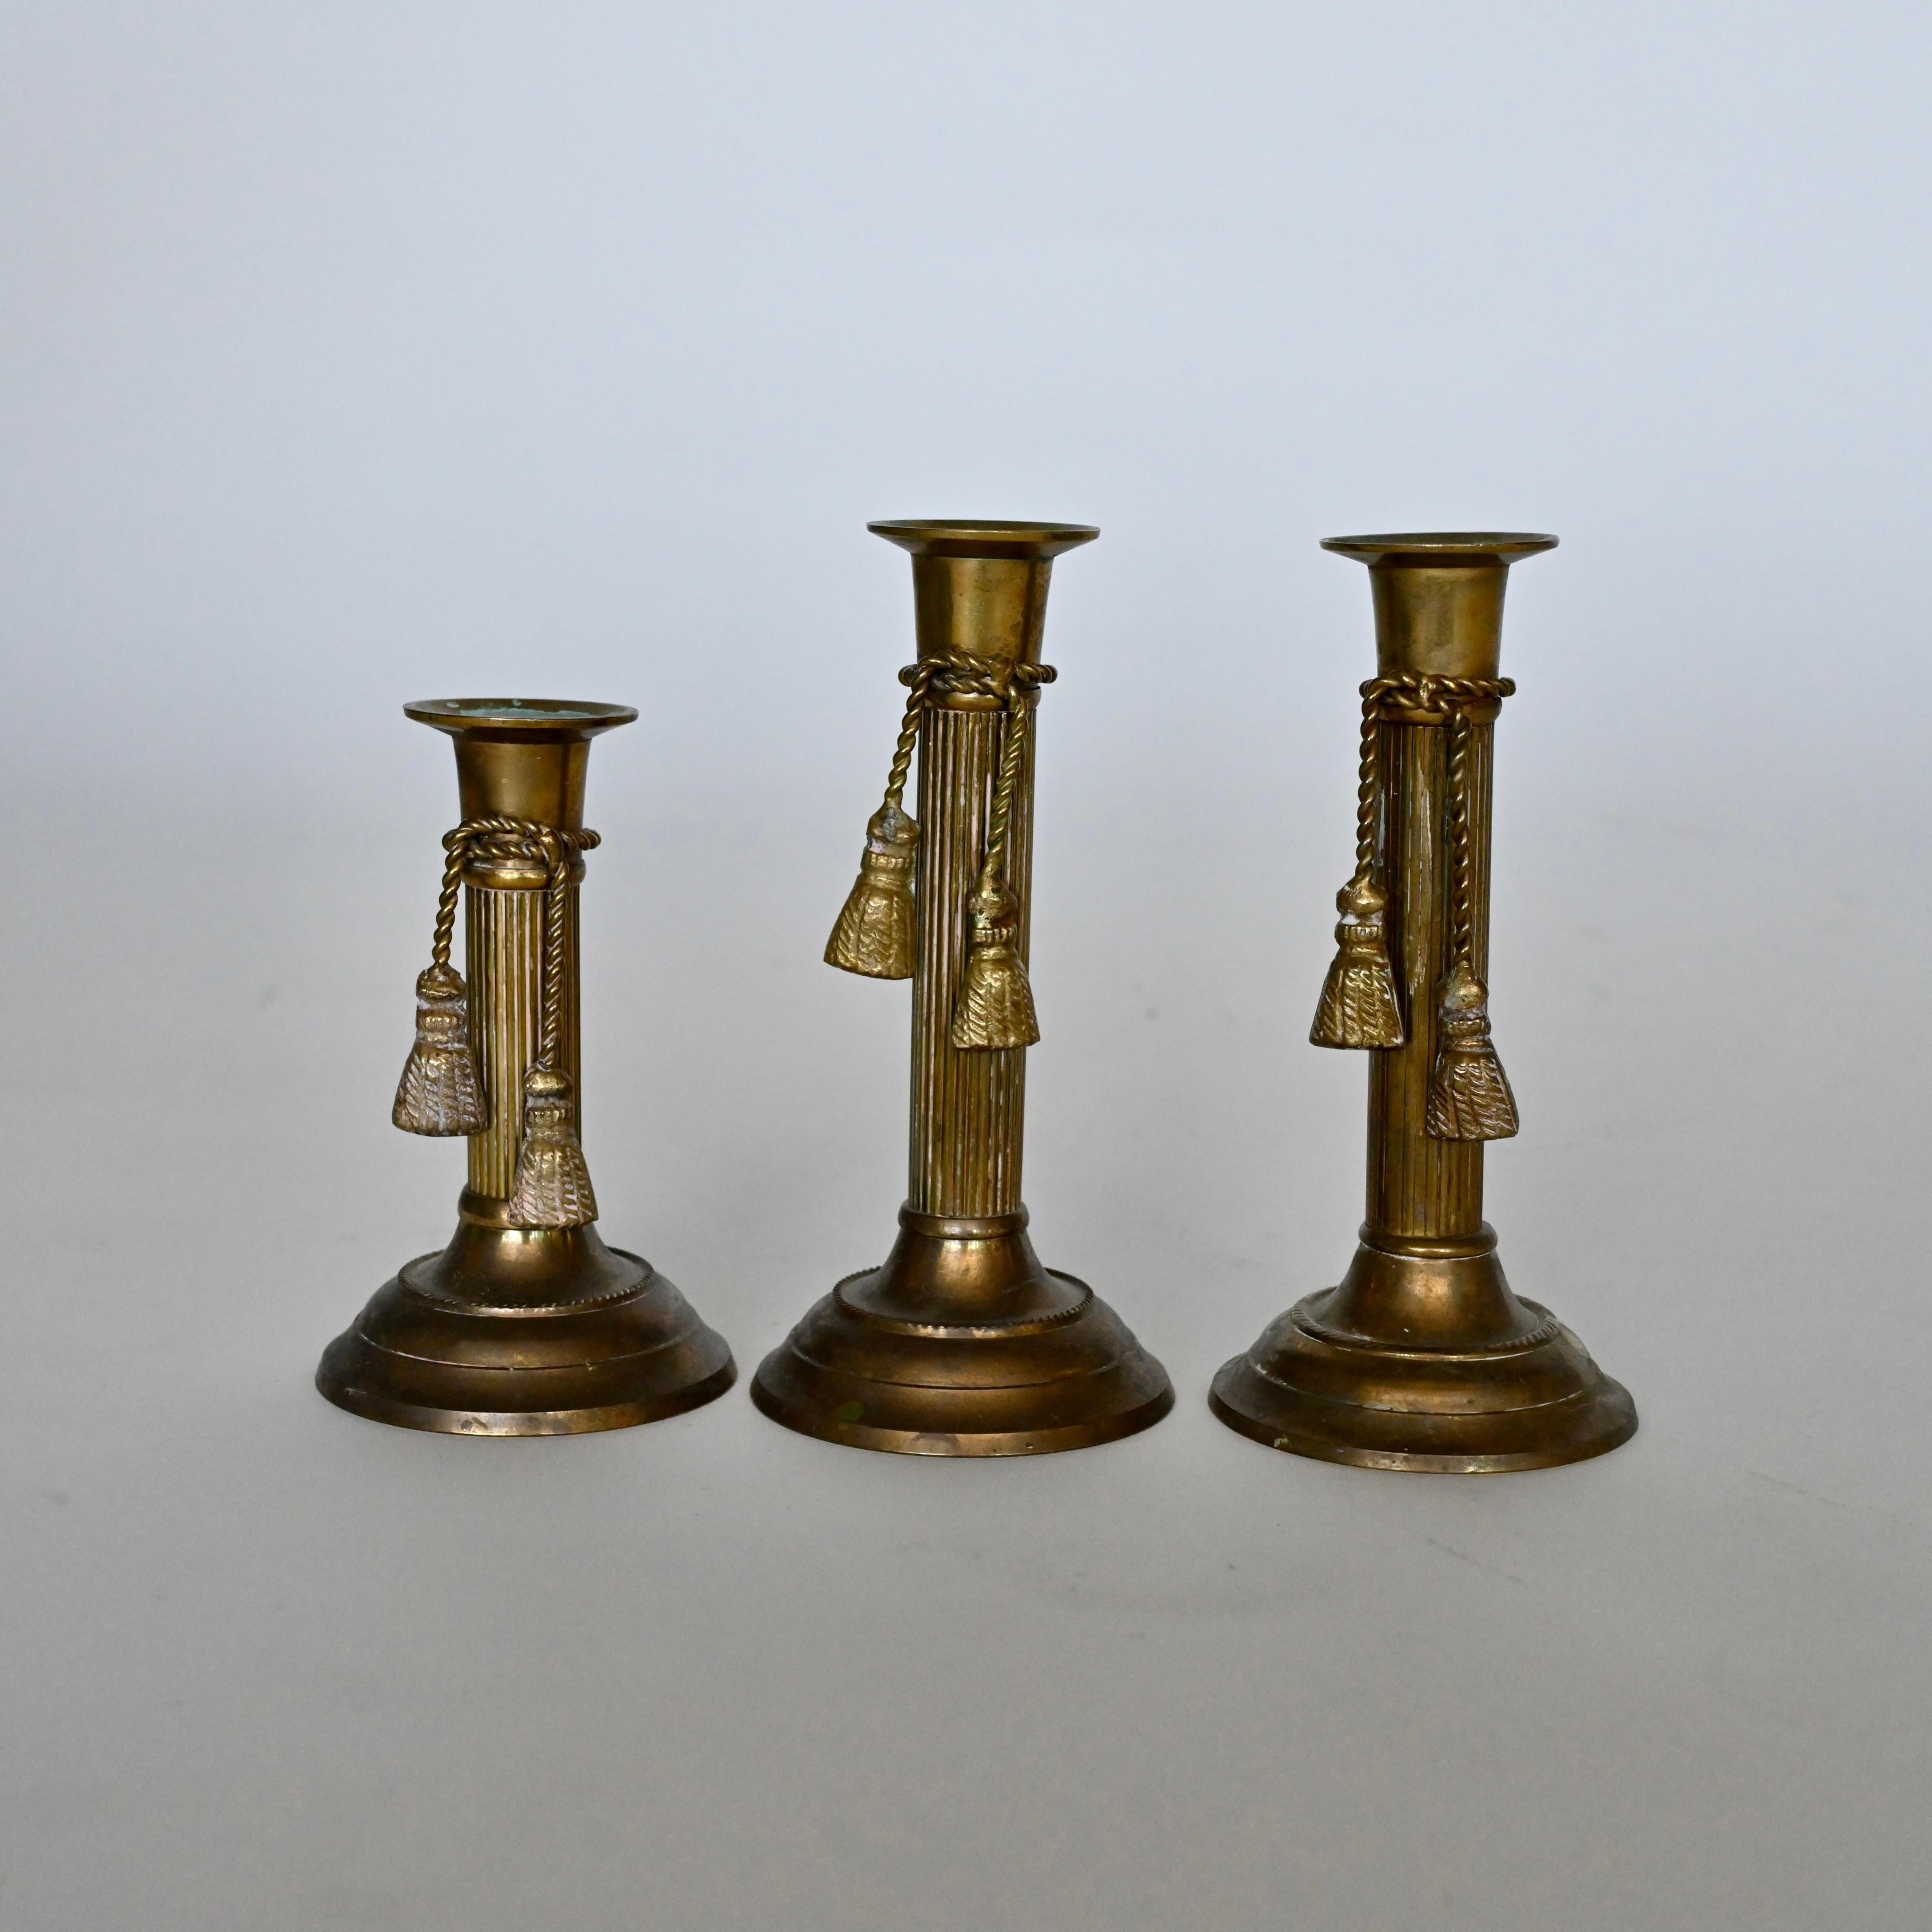 Metalwork Set of three brass candlesticks with tassel detail, mid 20th century. For Sale